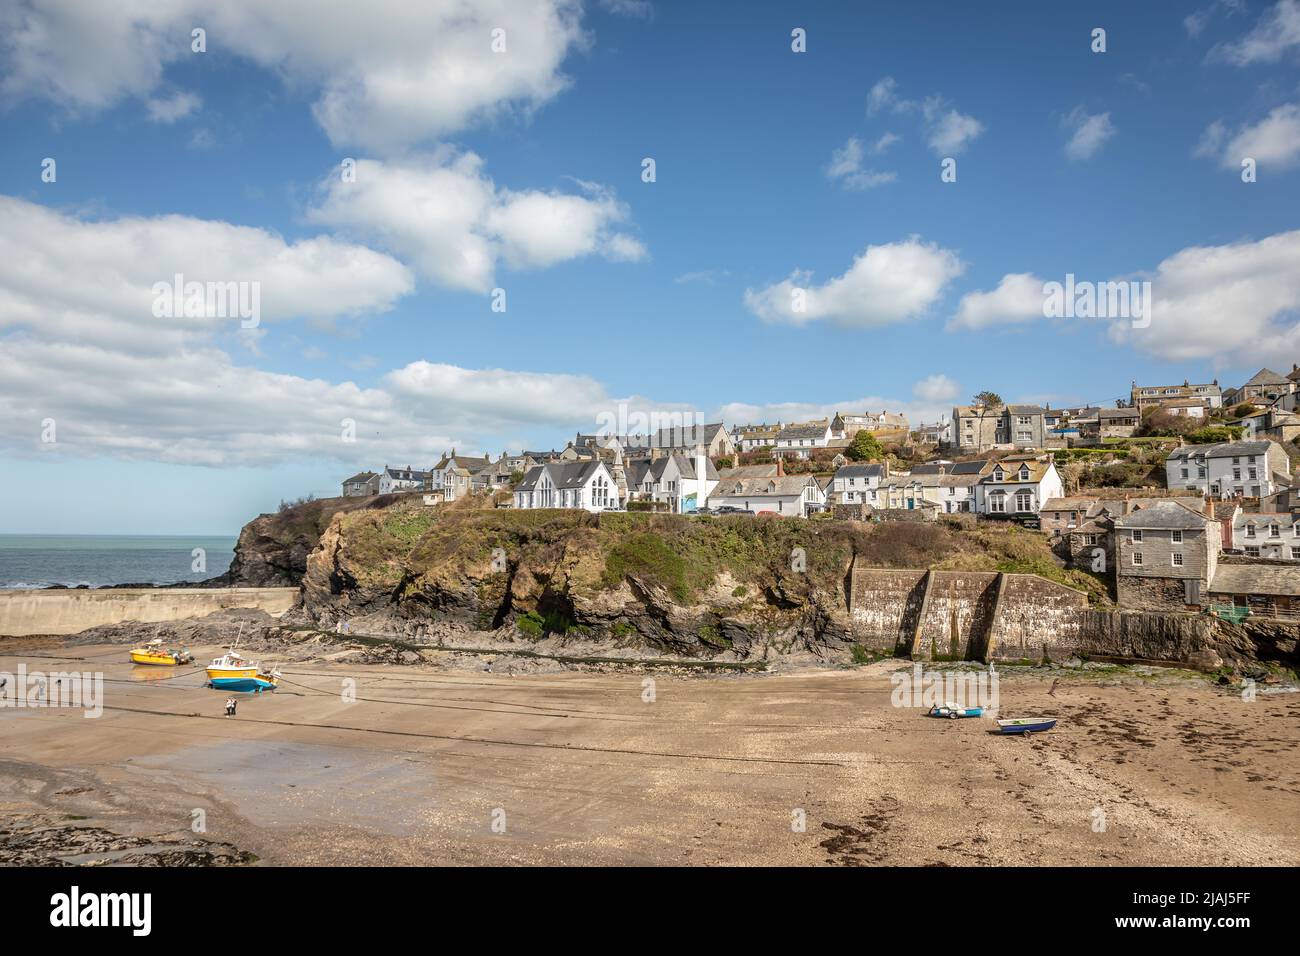 Beach and cliff-top houses, Port Isaac, Cornwall, England, UK Stock Photo